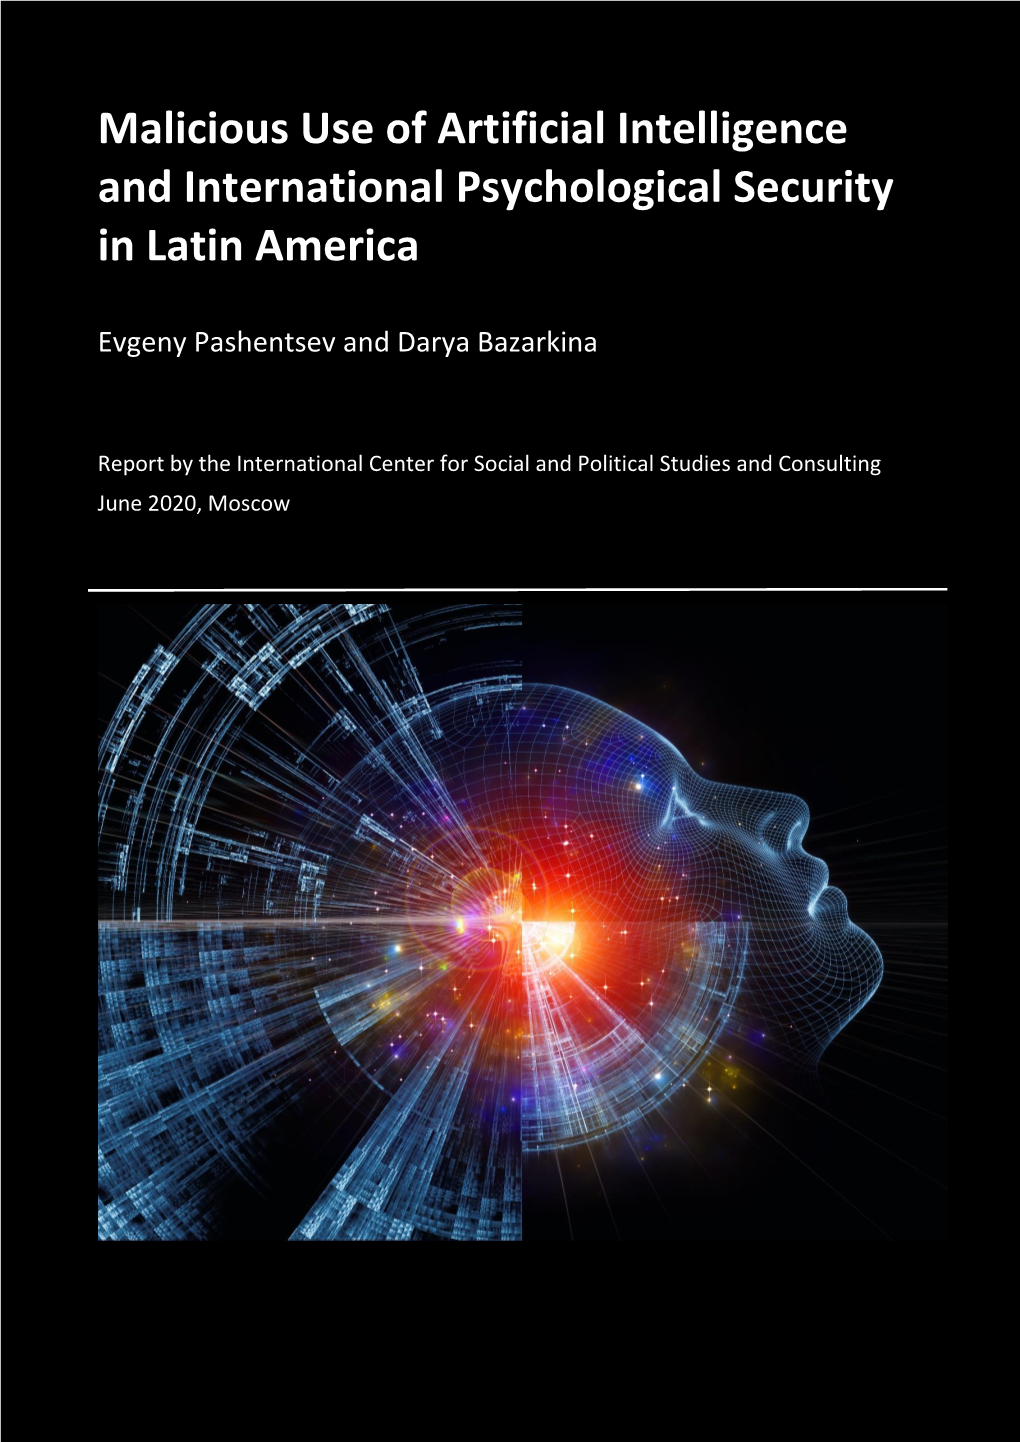 Malicious Use of Artificial Intelligence and International Psychological Security in Latin America